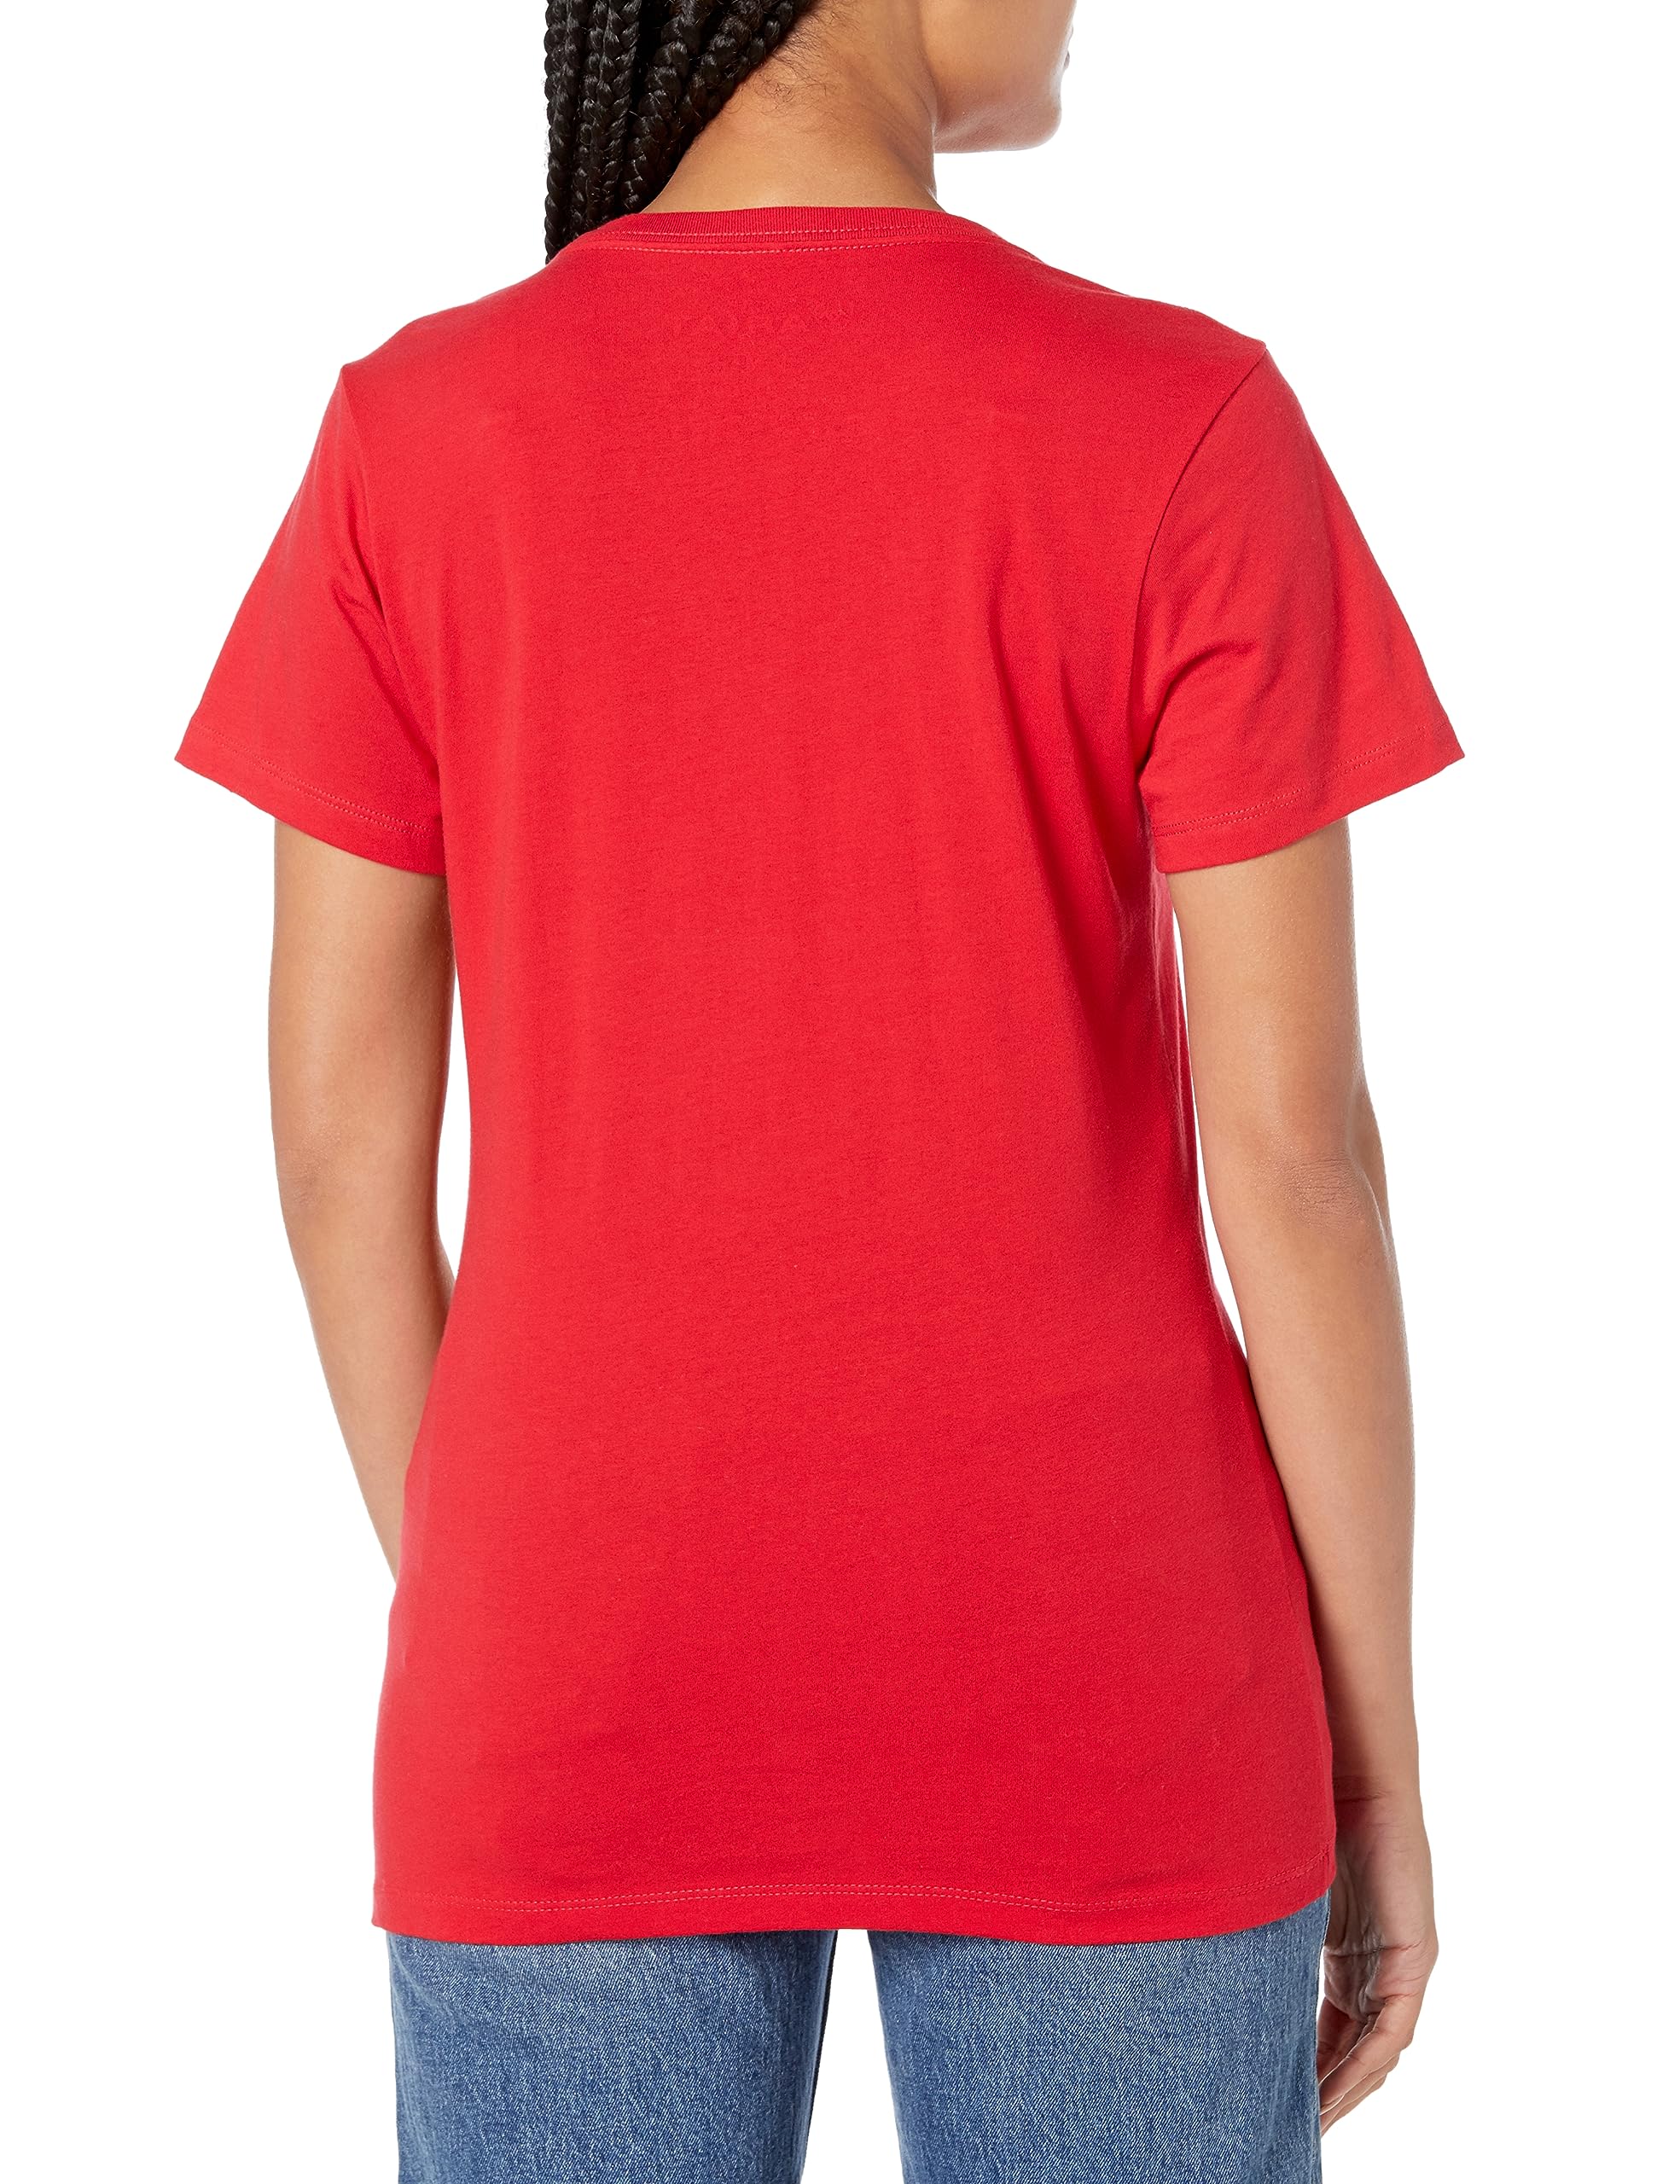 Ariat Female Ariat Mexico Independent T-Shirt Red X-Small